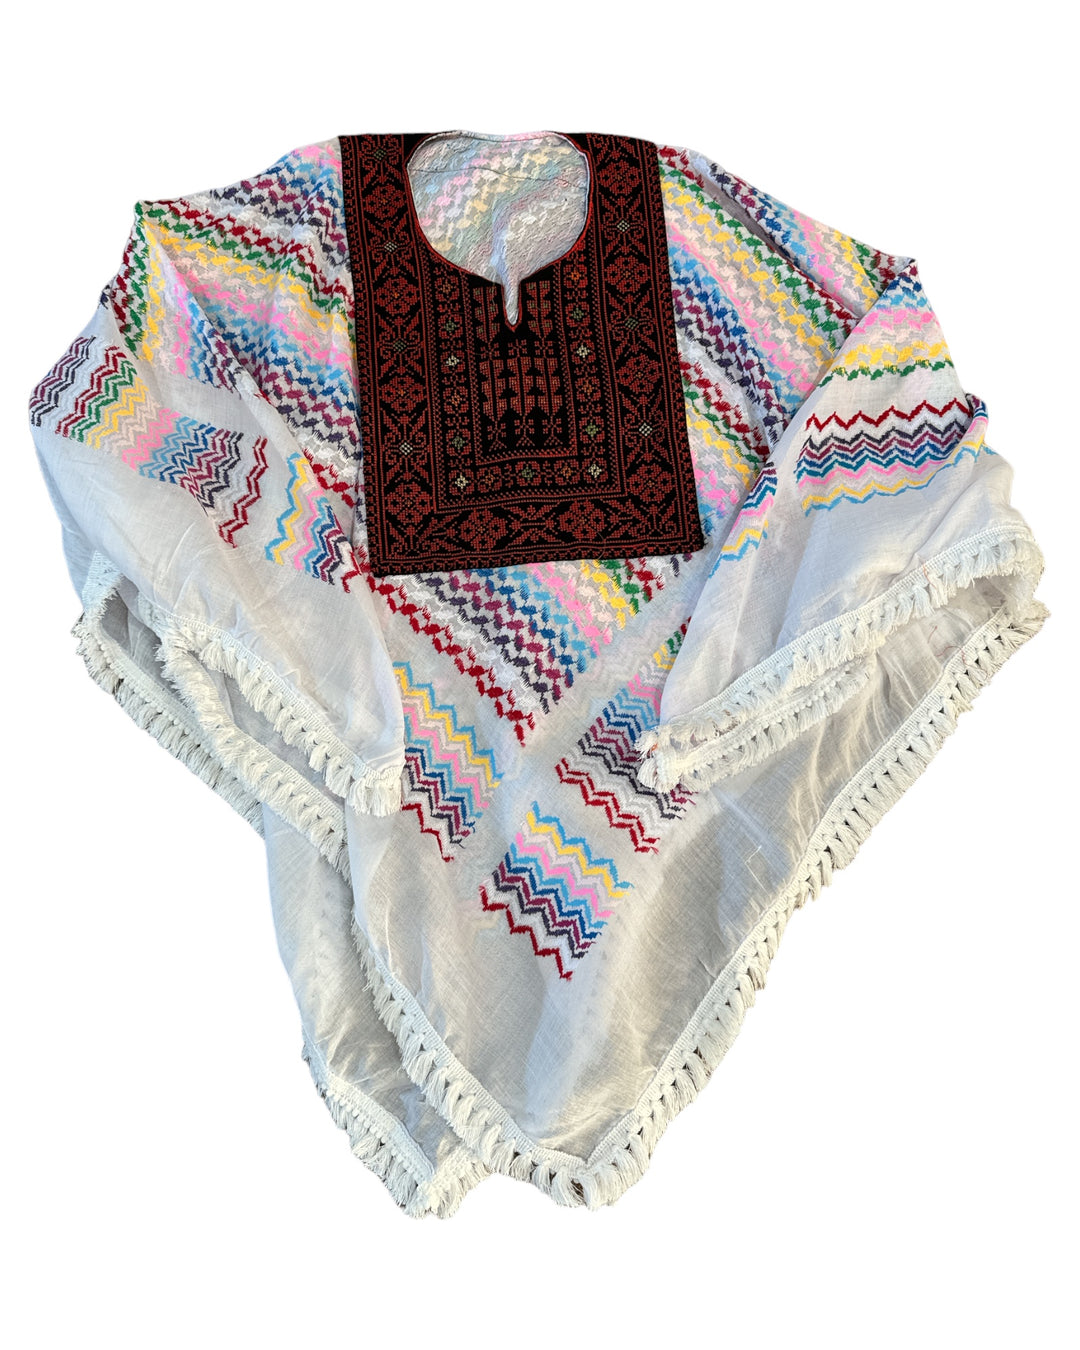 Hand Stitched White & Multi-Coloured Poncho with Keffiyeh design and Embroidery